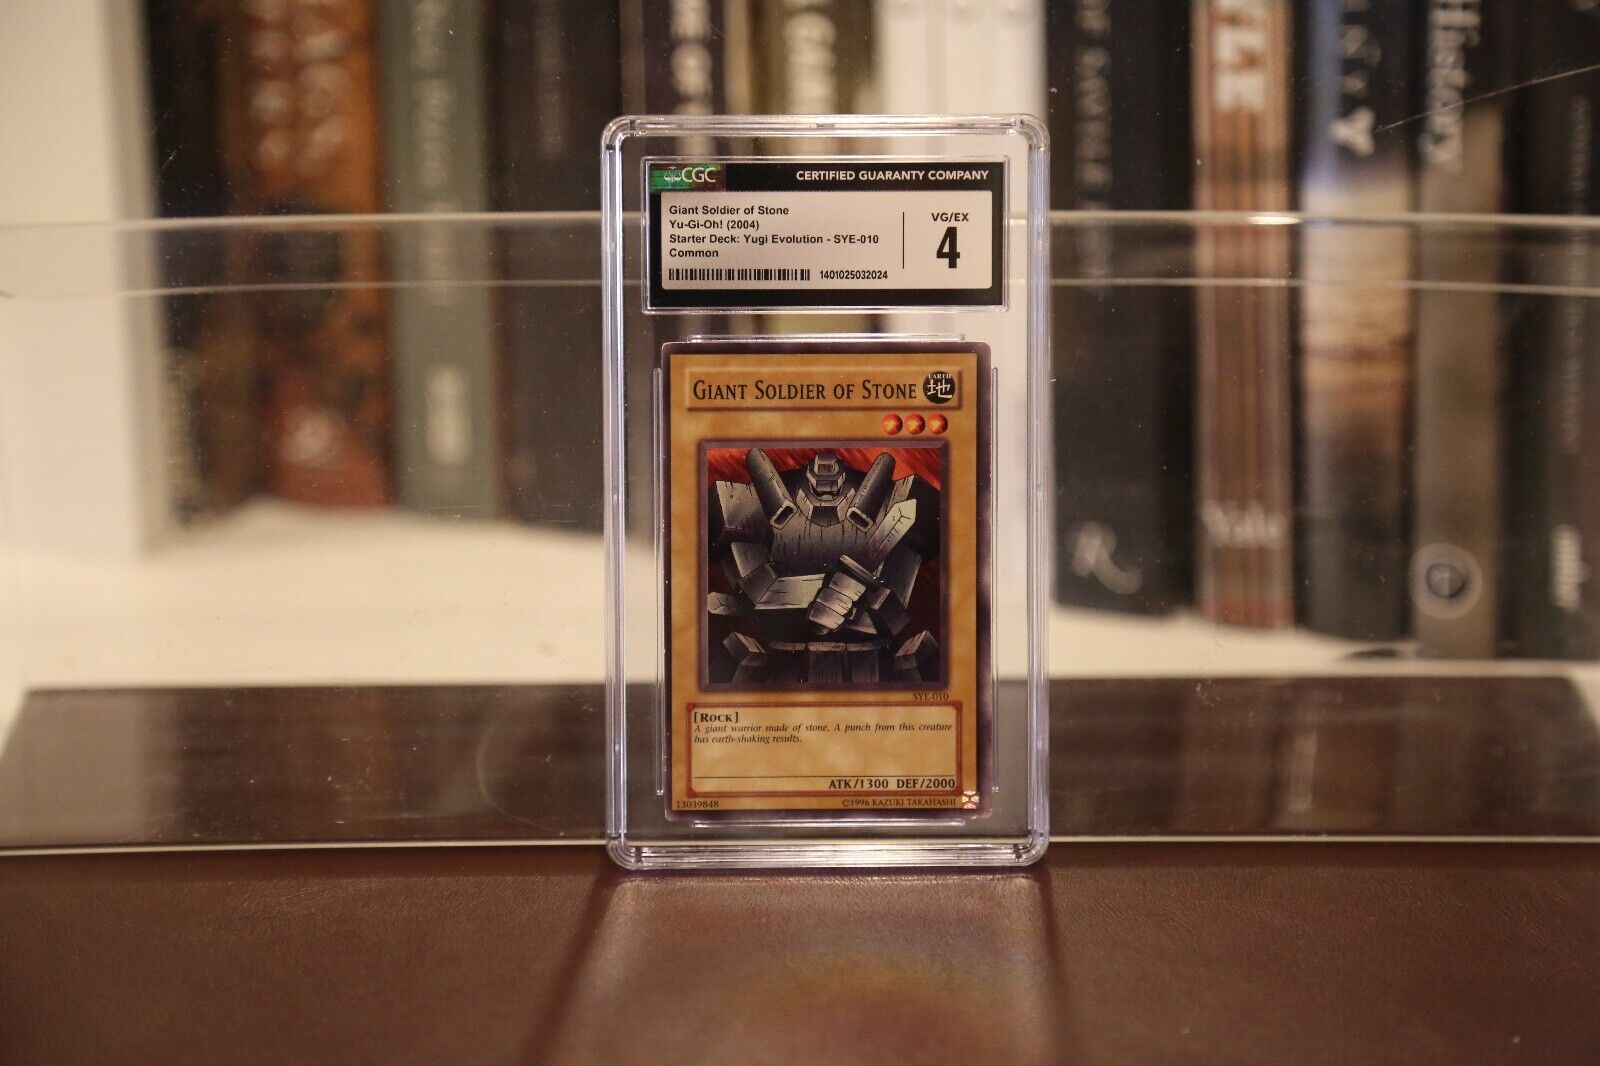 2004 Yu-Gi-Oh - Giant Soldier of Stone - Unlimited - Yugi Evolution - CGC 4